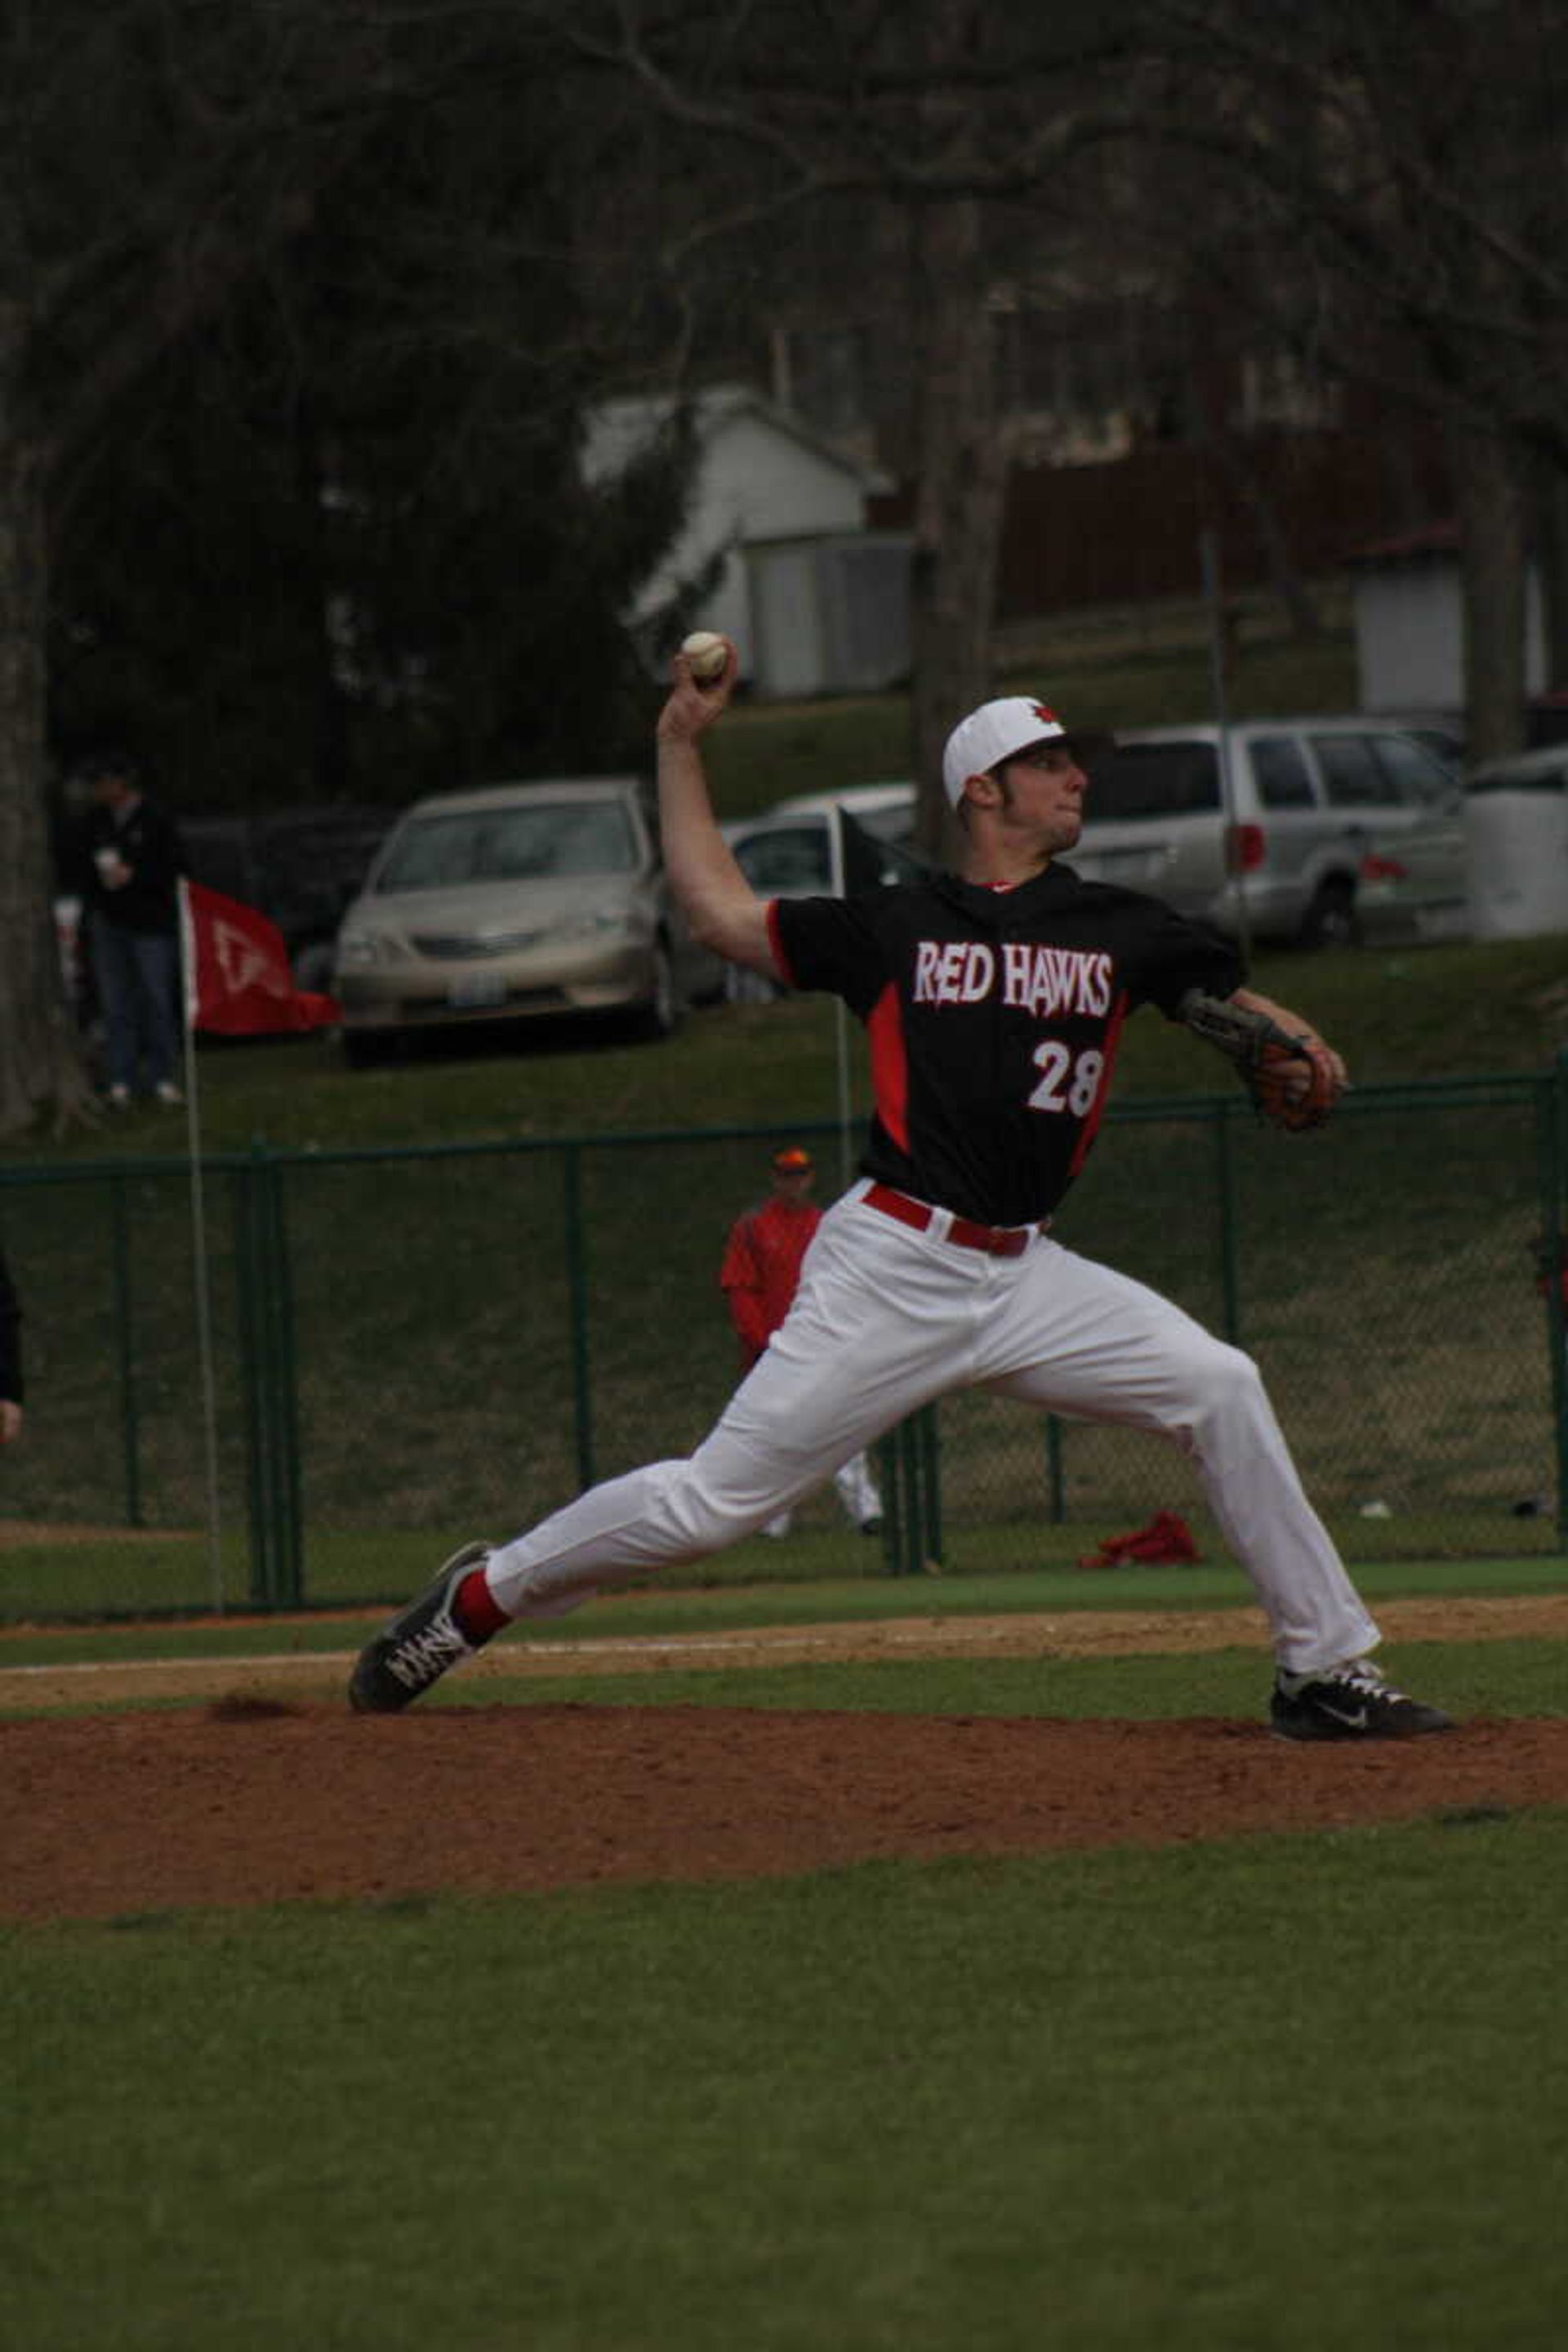 Freshman pitcher Cody Spanberger pitched against Illinois State University on March 4 at Capaha Park. -Photo by Nathan Hamilton